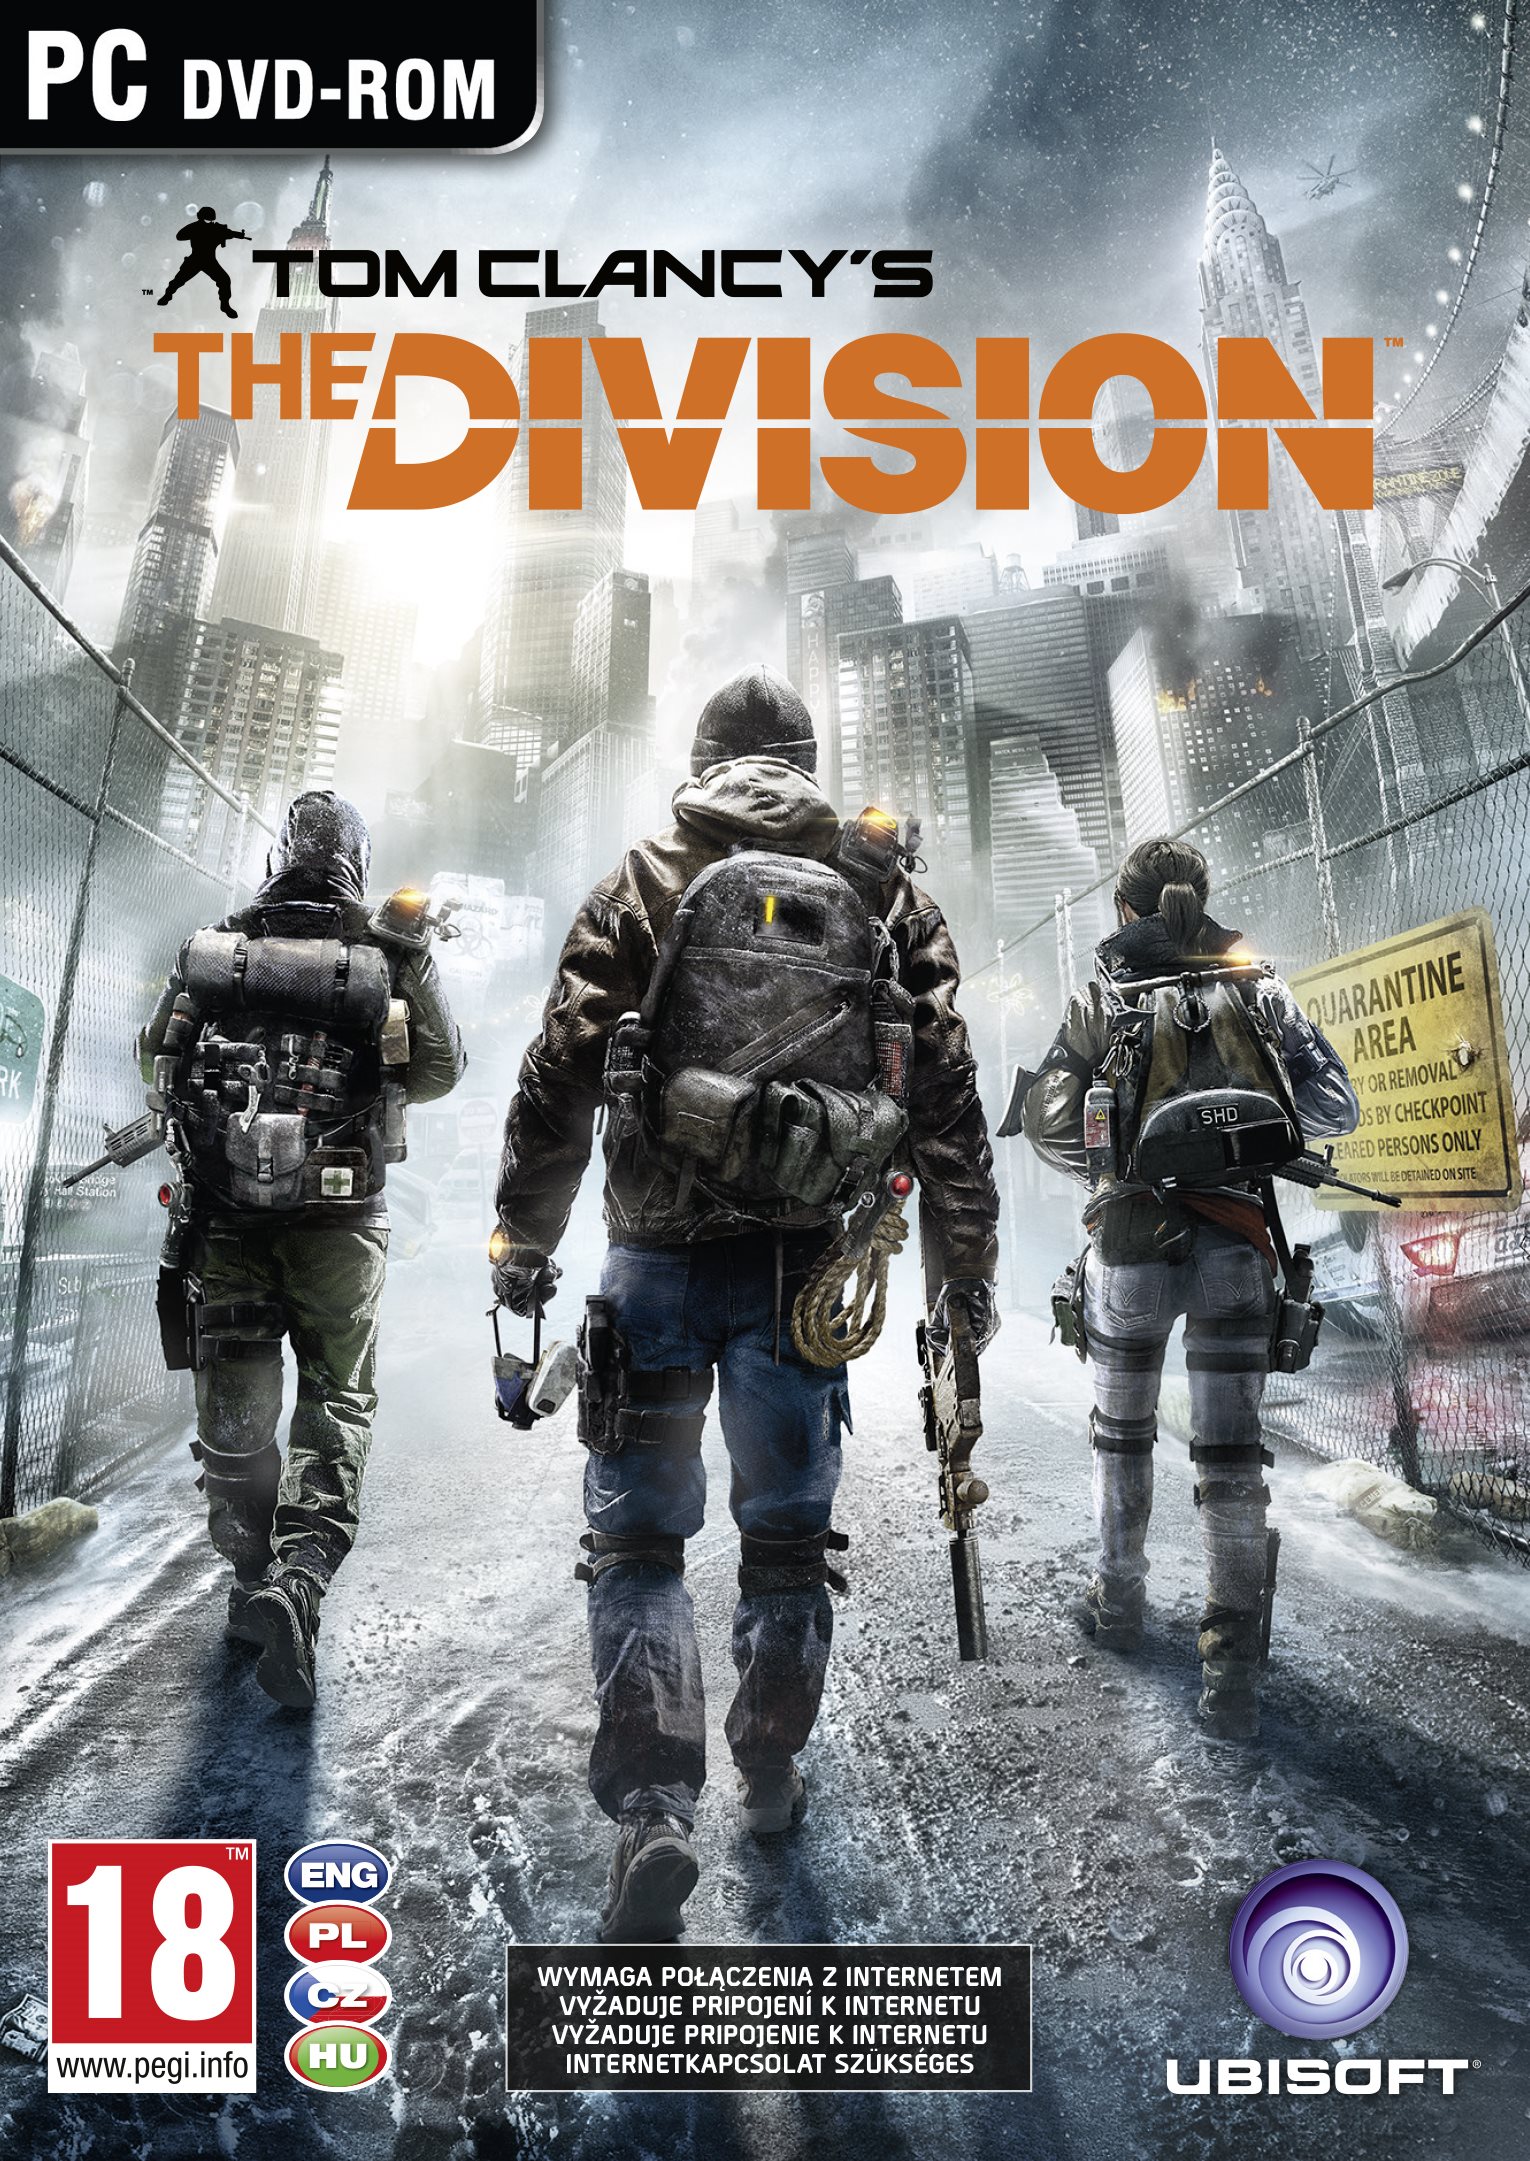 Tom Clancy's The Division – PC DIGITAL